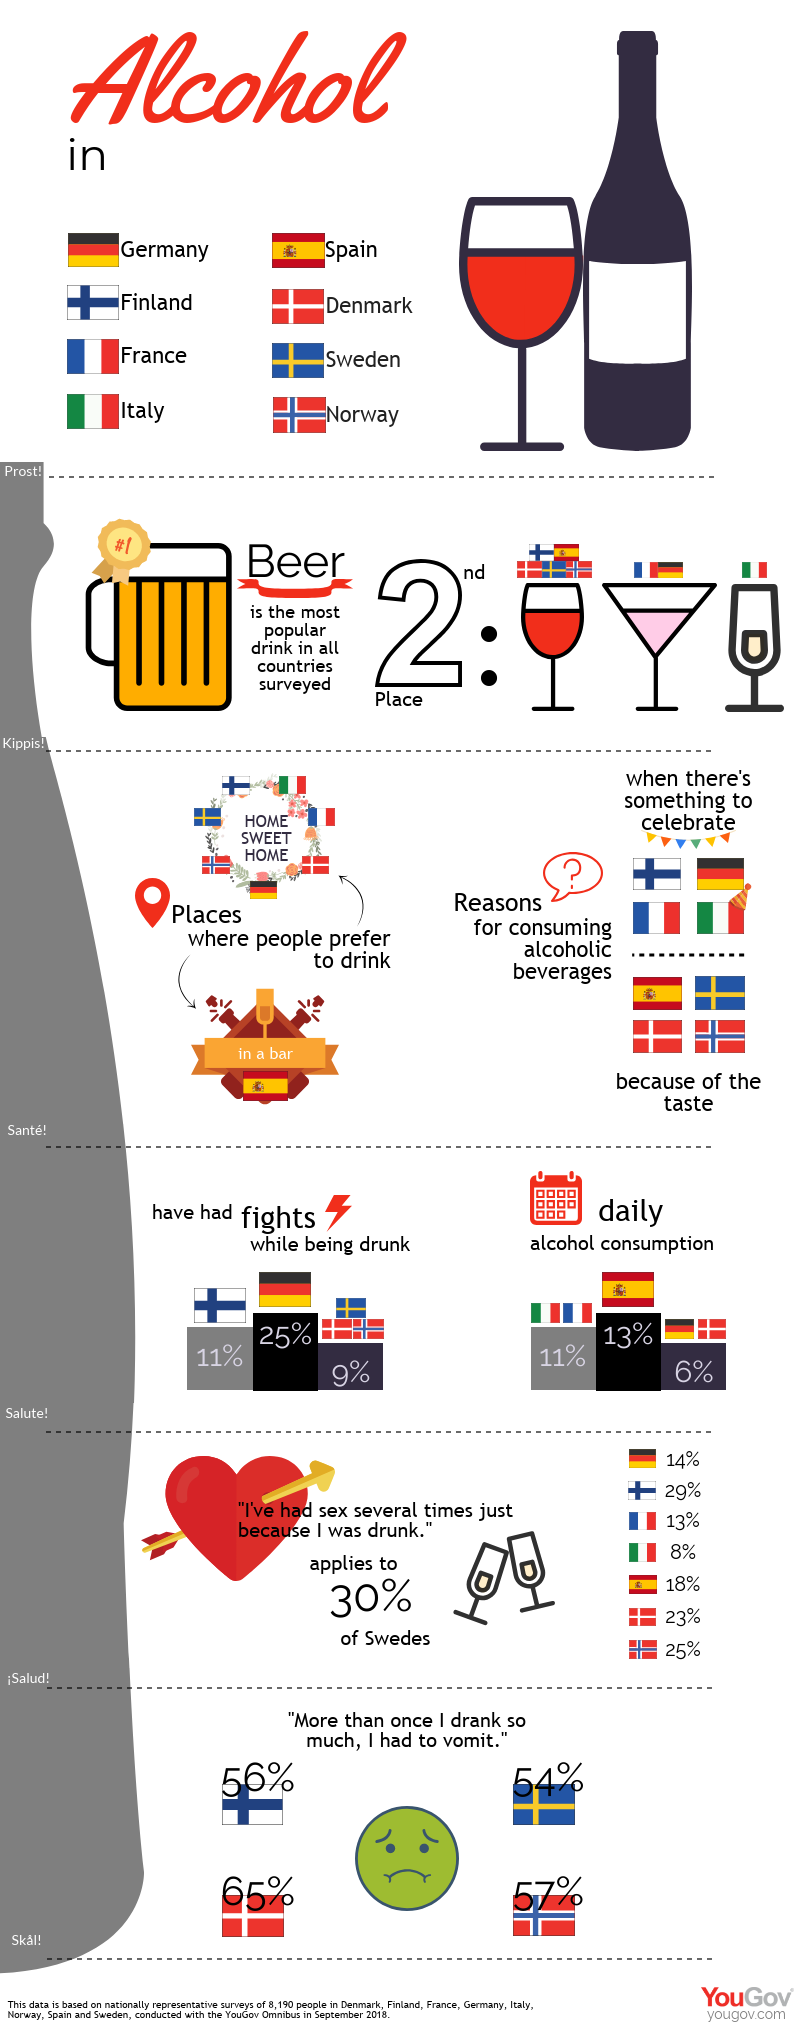 Alcohol in Europe